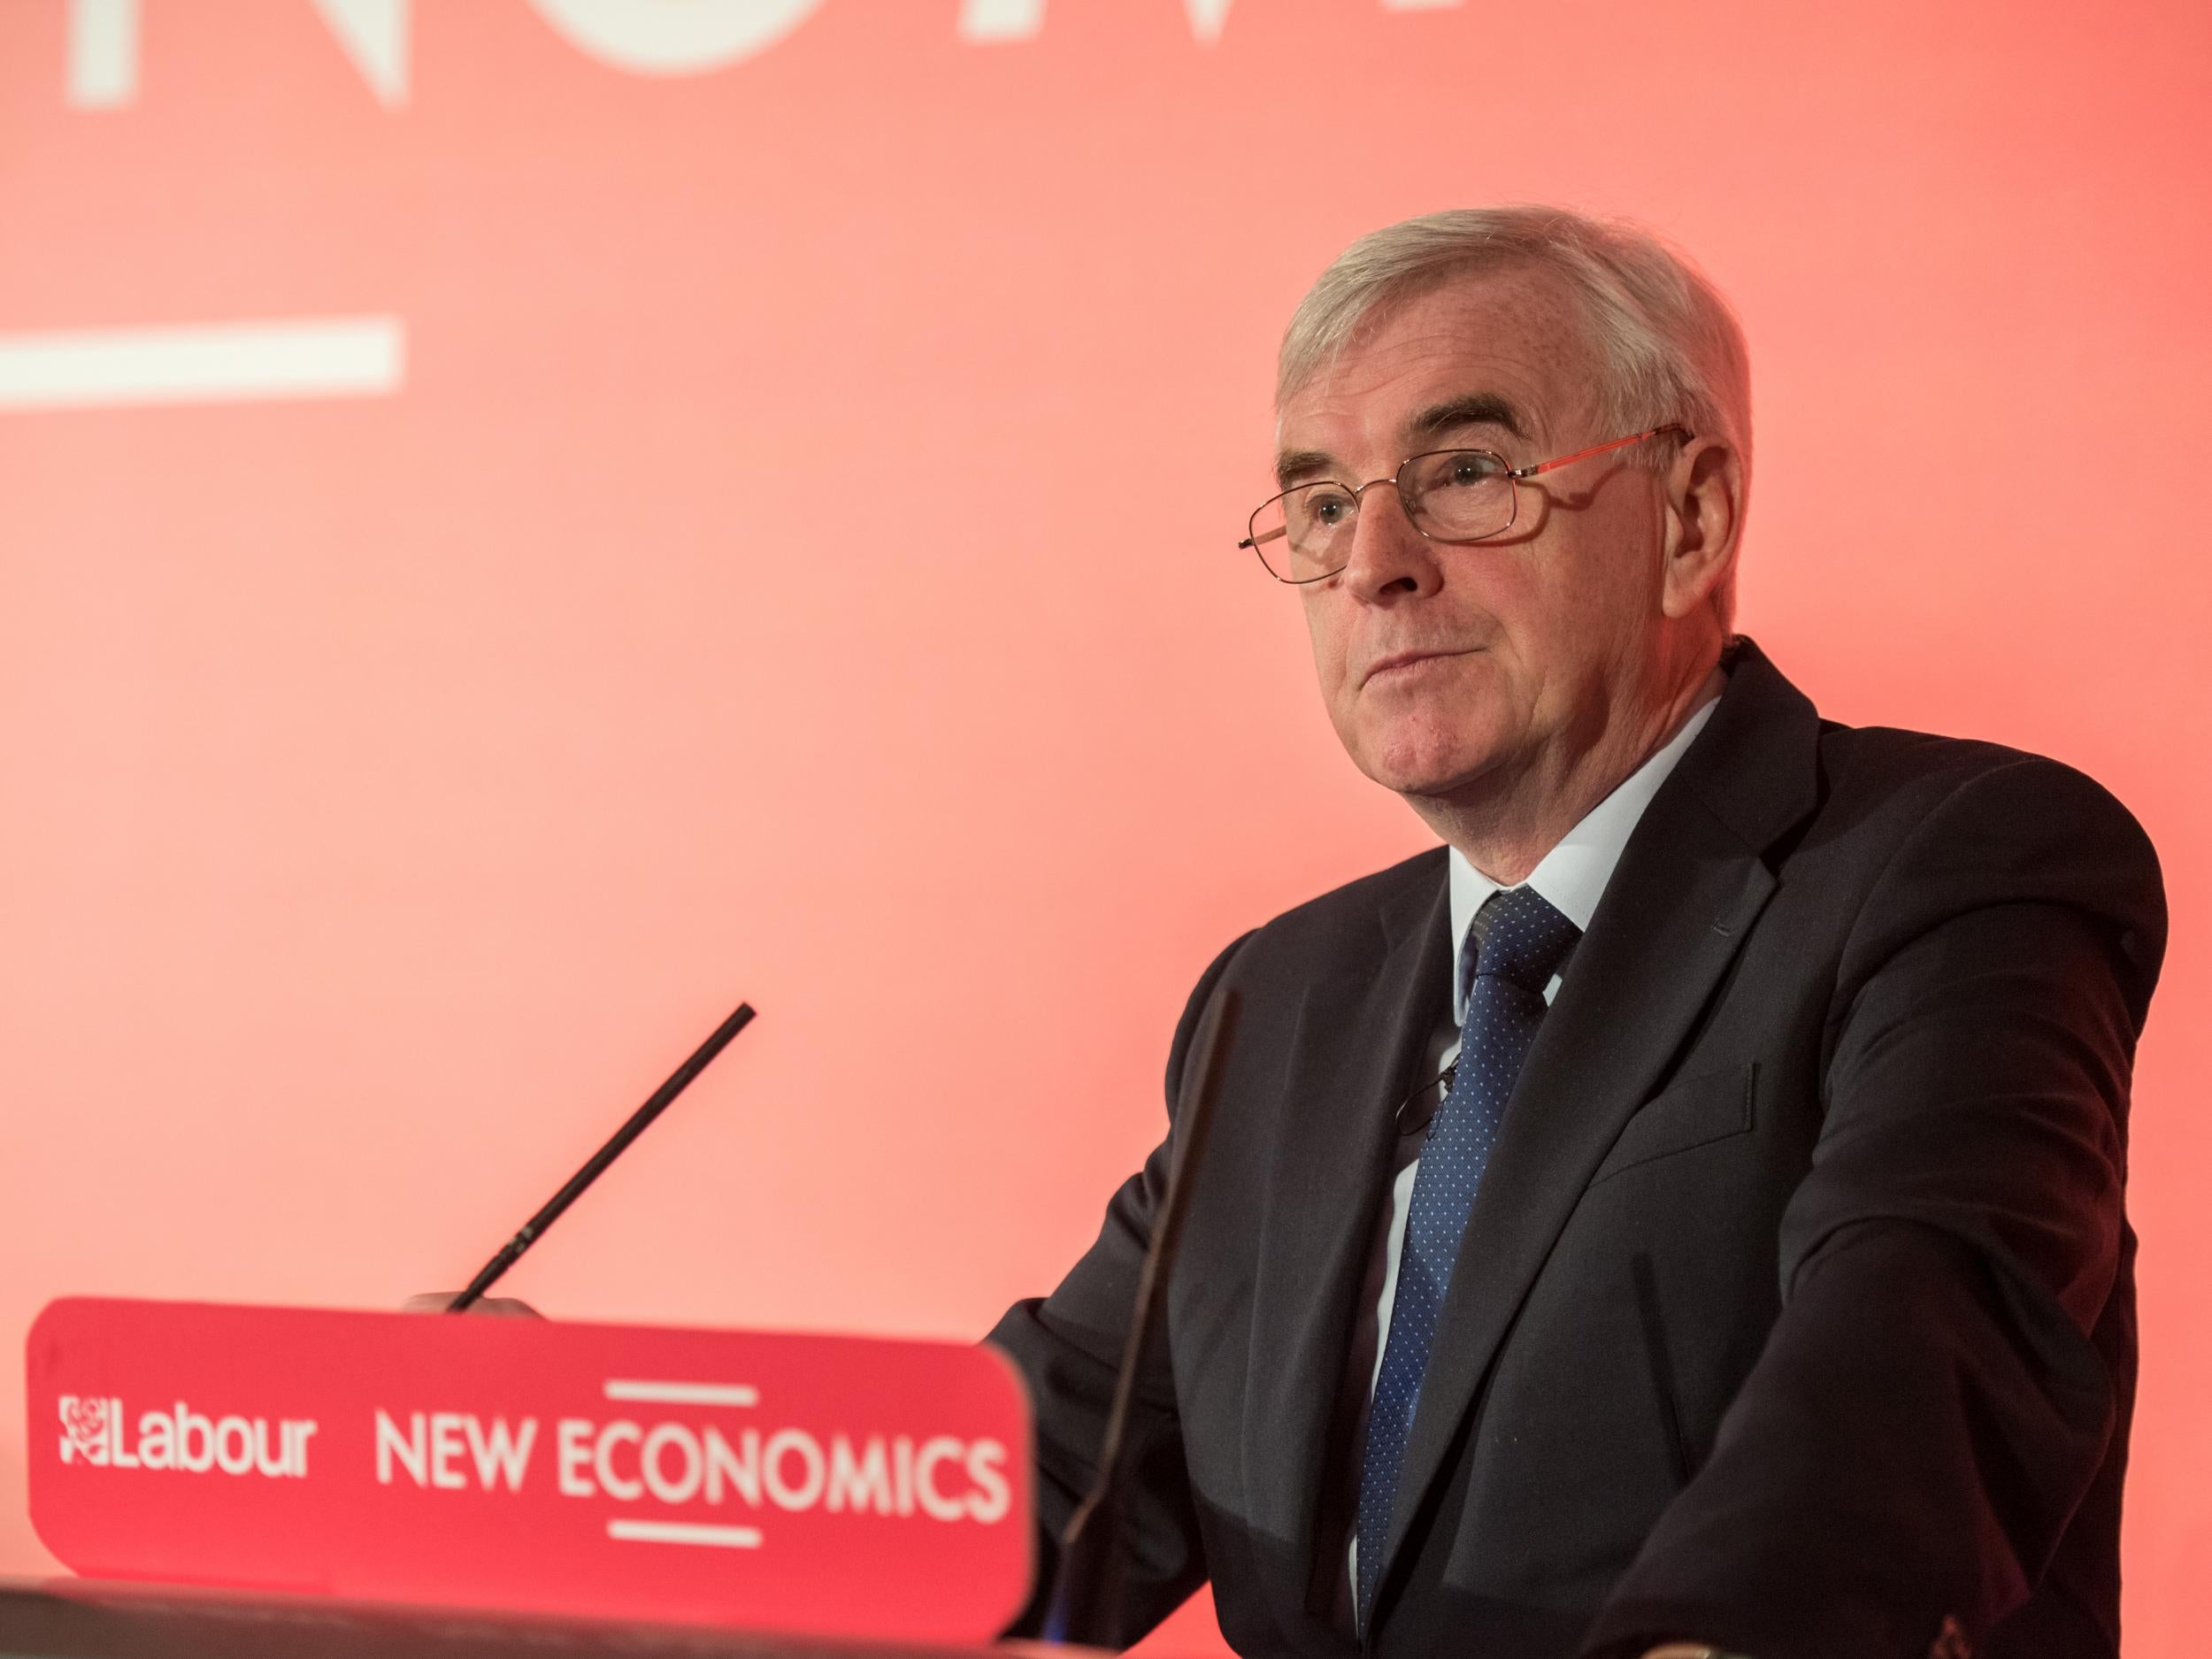 John McDonnell's comments come two days after veteran Labour MP Frank Field quit the party